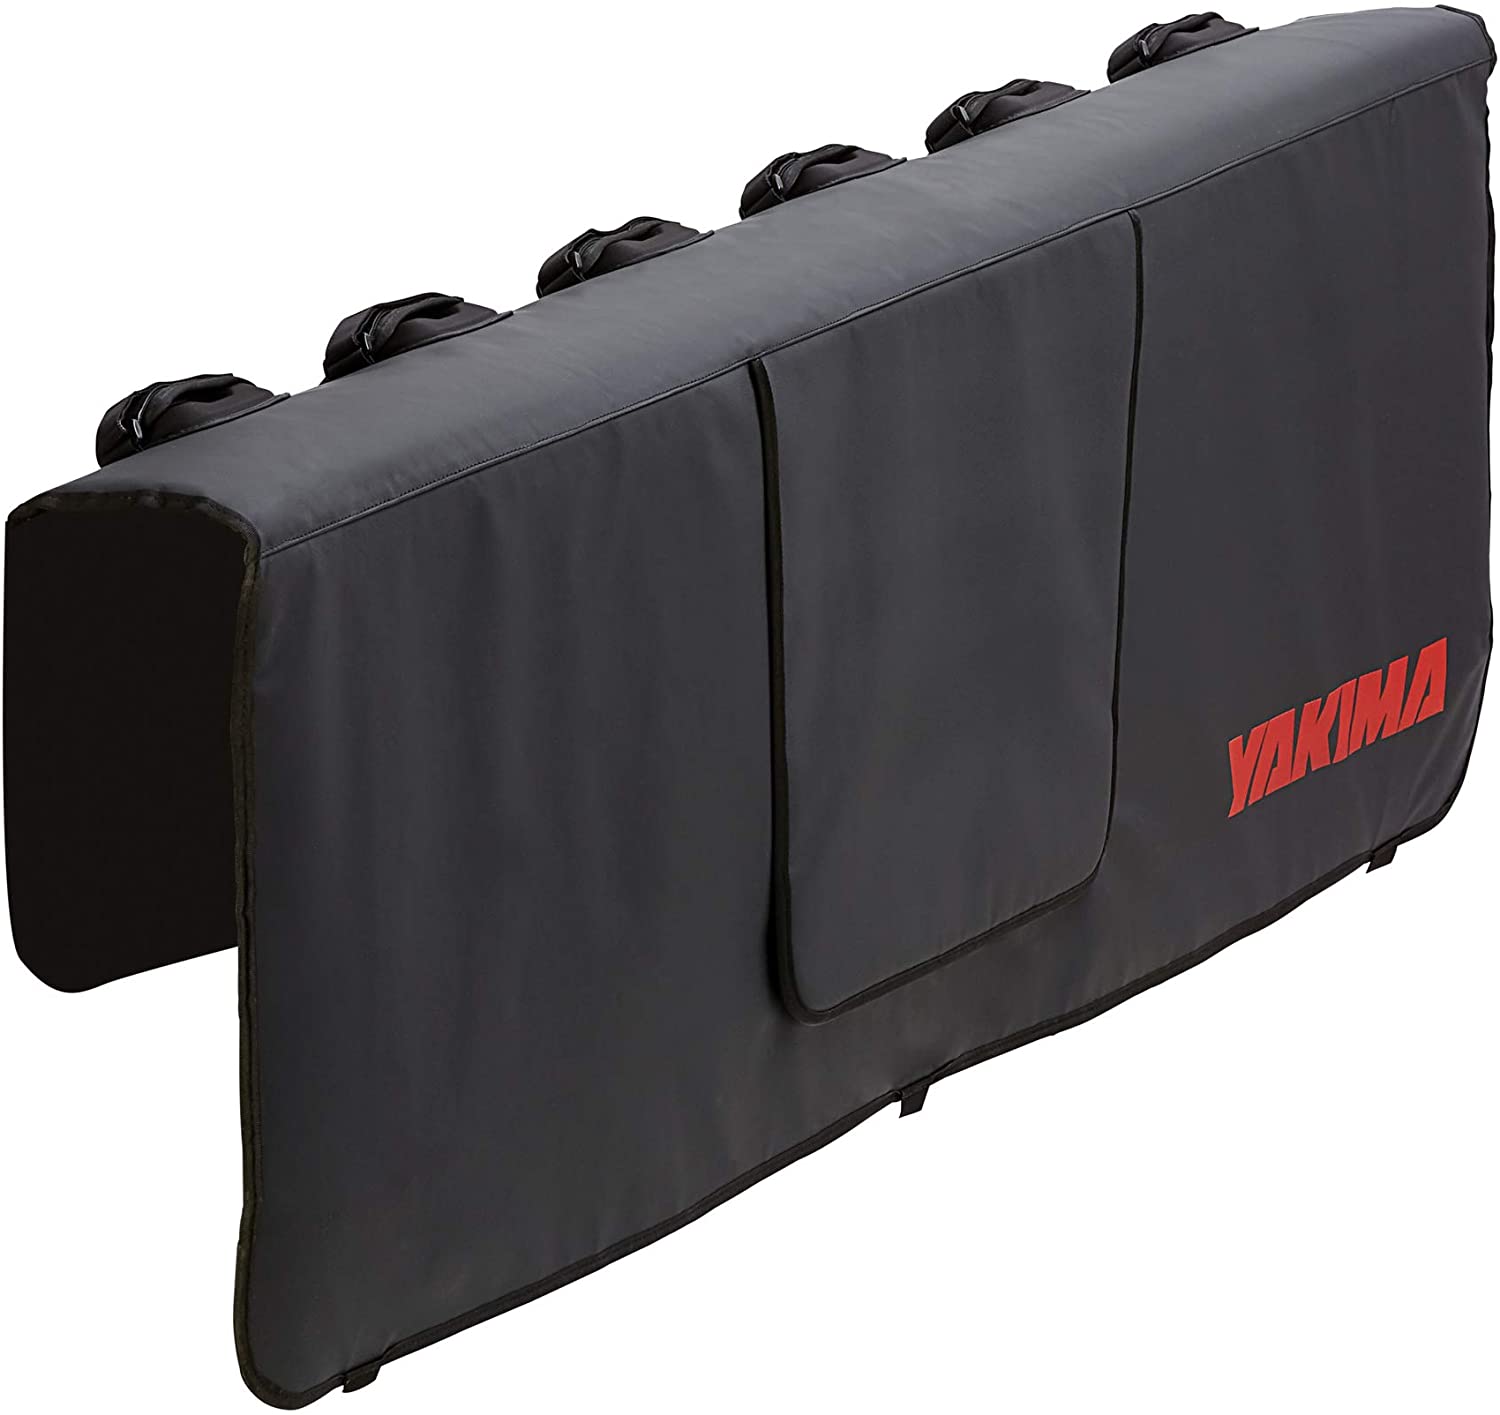 Yakima - GateKeeper Tailgate Pad for Compact Truck Beds, Carries Up To 5 Bikes